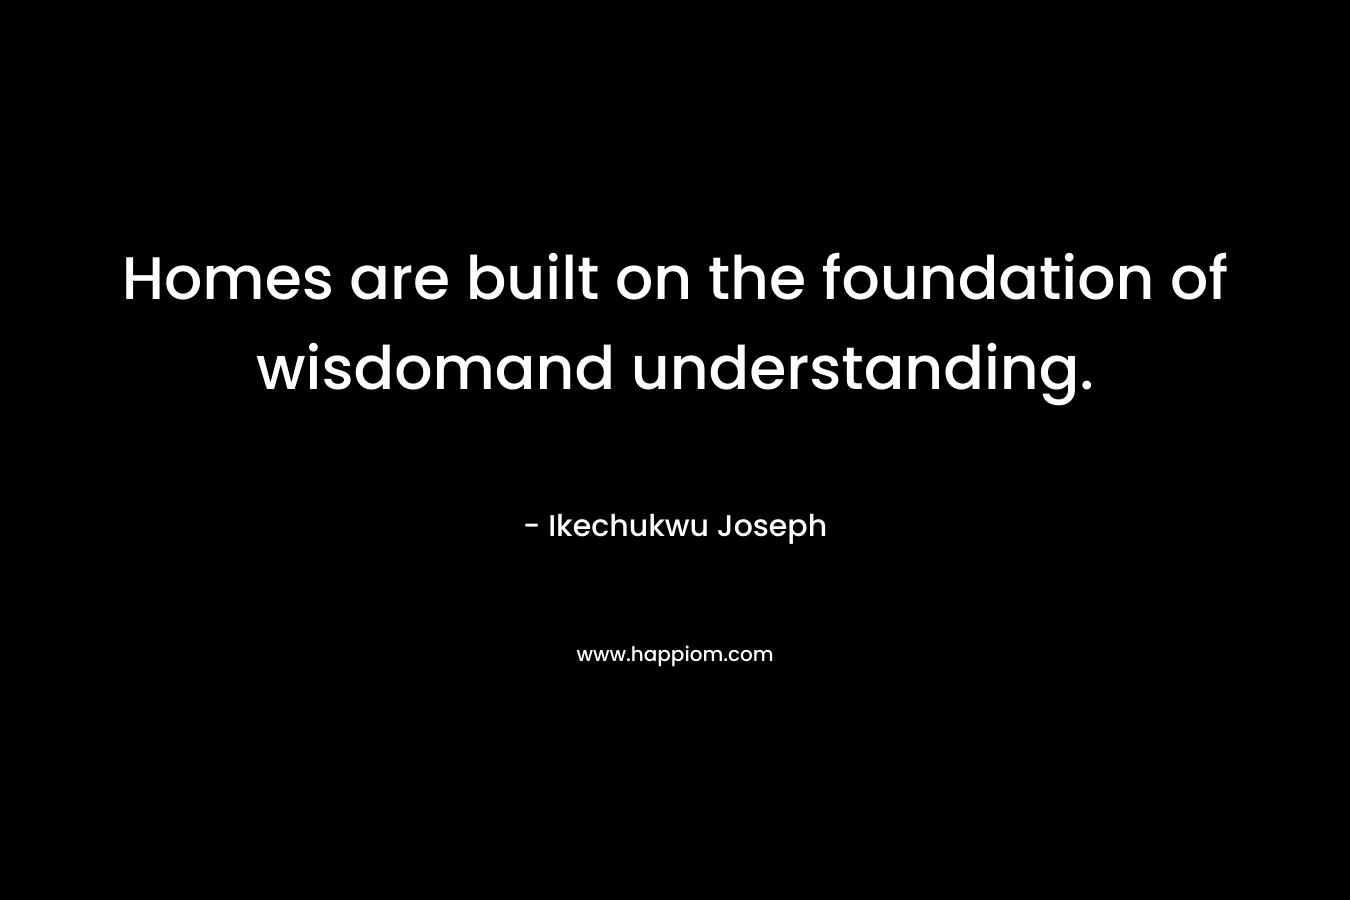 Homes are built on the foundation of wisdomand understanding.